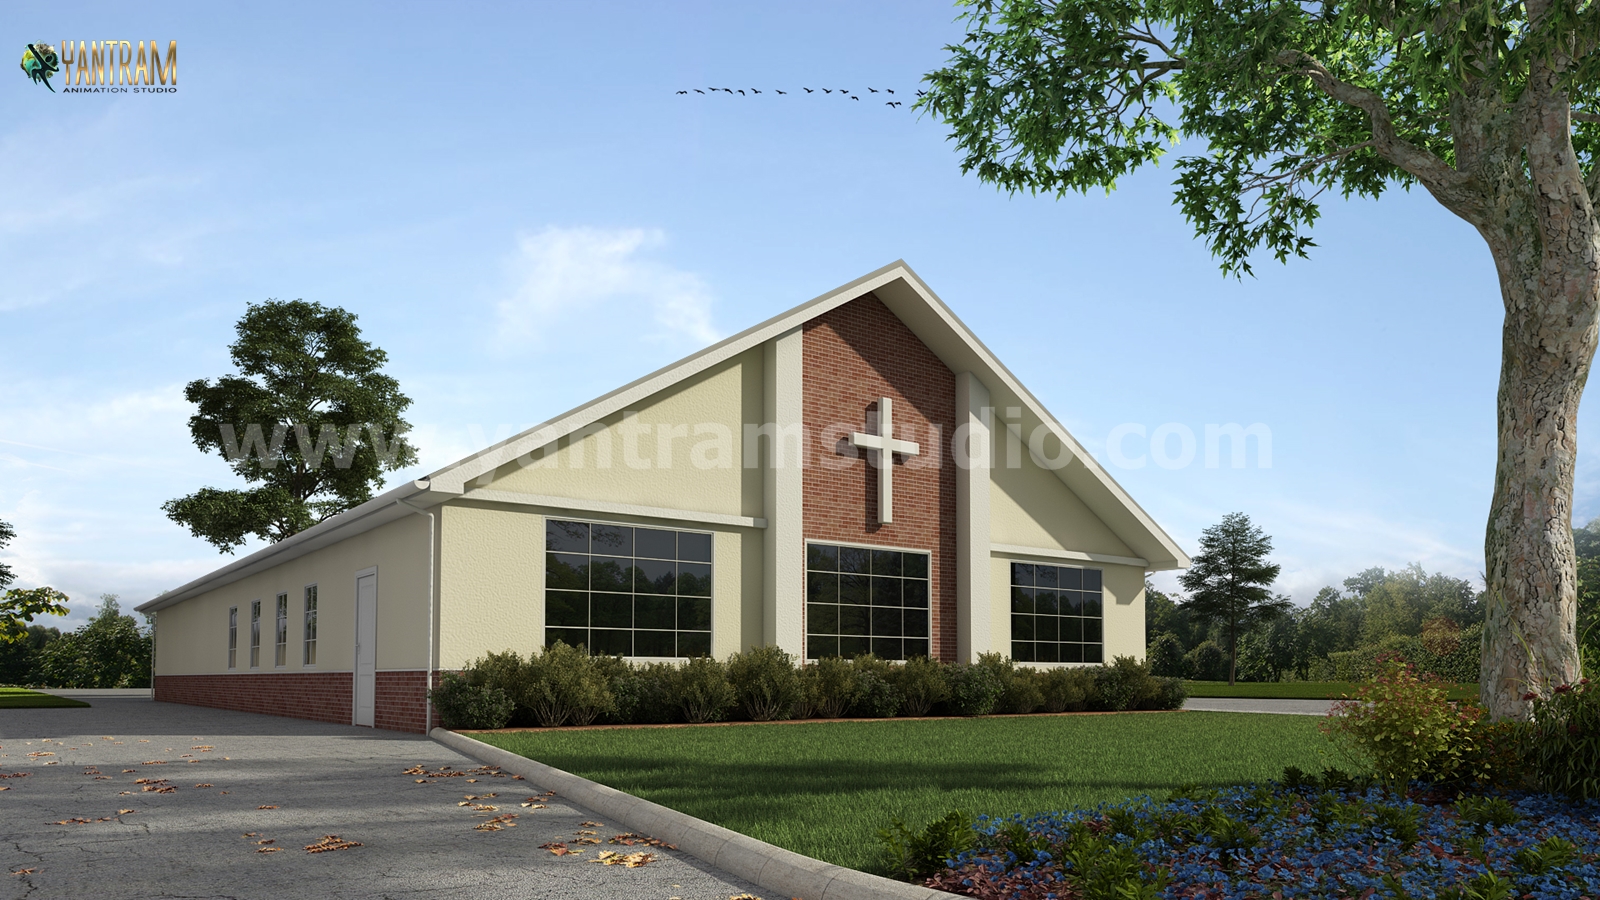 Small Church Architectural Building of Exterior Rendering Services by Yantram Architectural modeling firm, Giza – Egypt